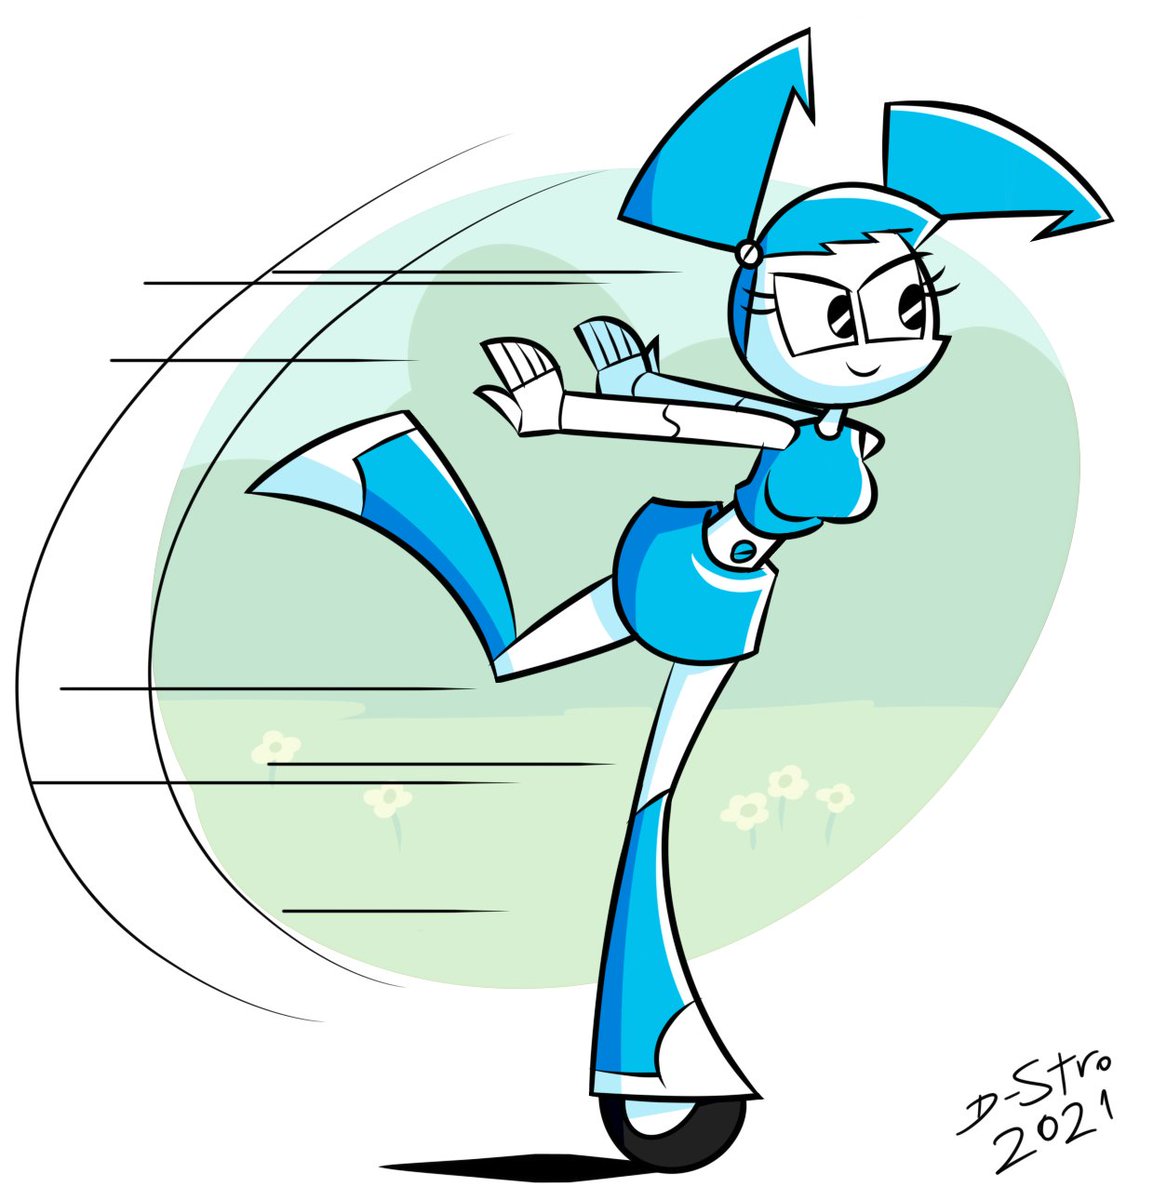 RT @DStroart: Jenny making her entrance from I think Nickelodeon Super Brawl I guess
#DrawJennySunday #mlaatr https://t.co/E22h8QYbLy